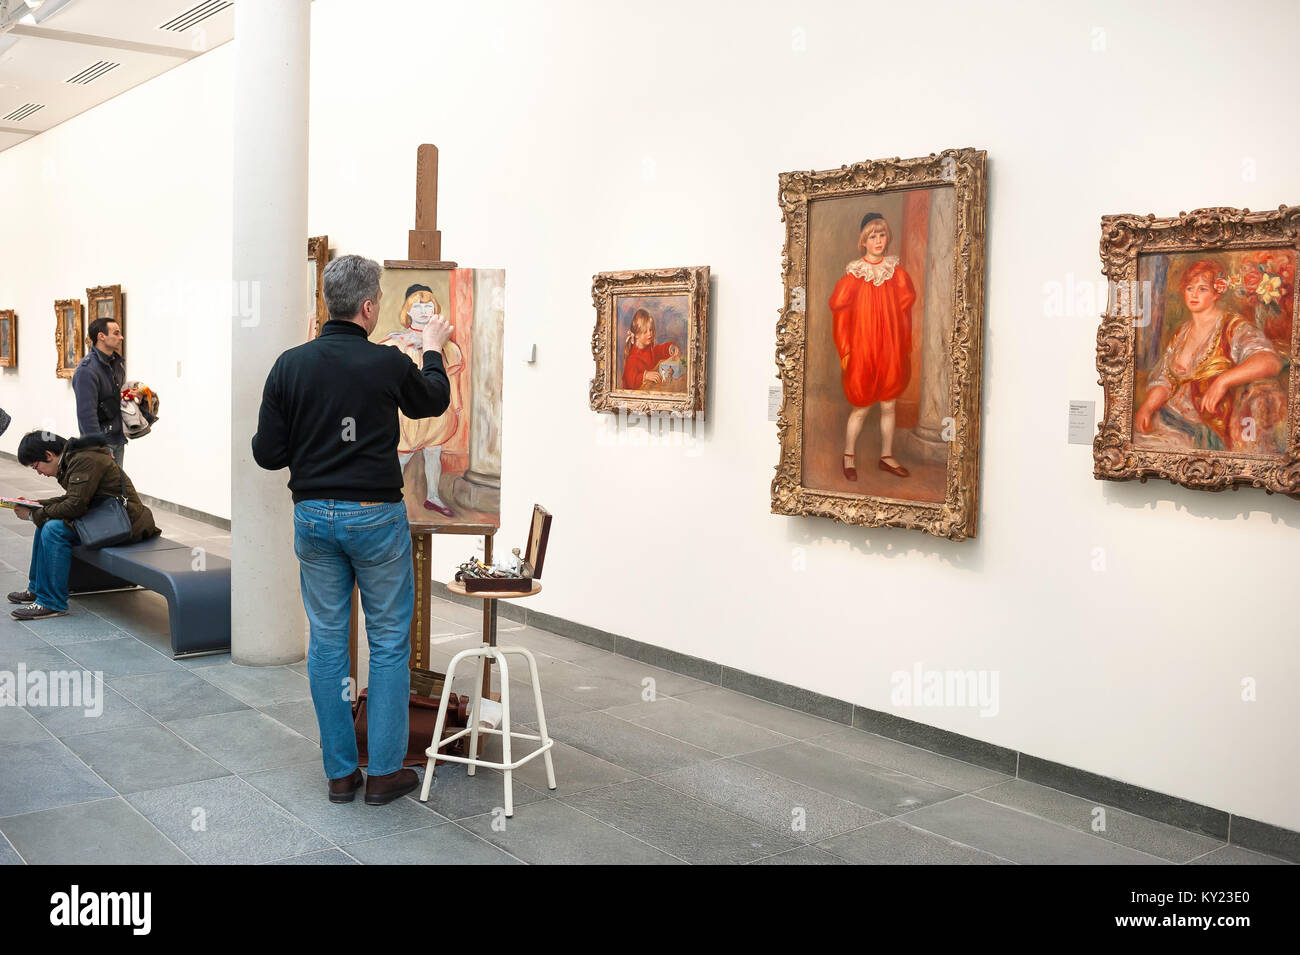 Man painting picture, view of a man copying a painting by Auguste Renoir titled Claude Renoir en Clown in the Musee de L'Orangerie in Paris , France. Stock Photo